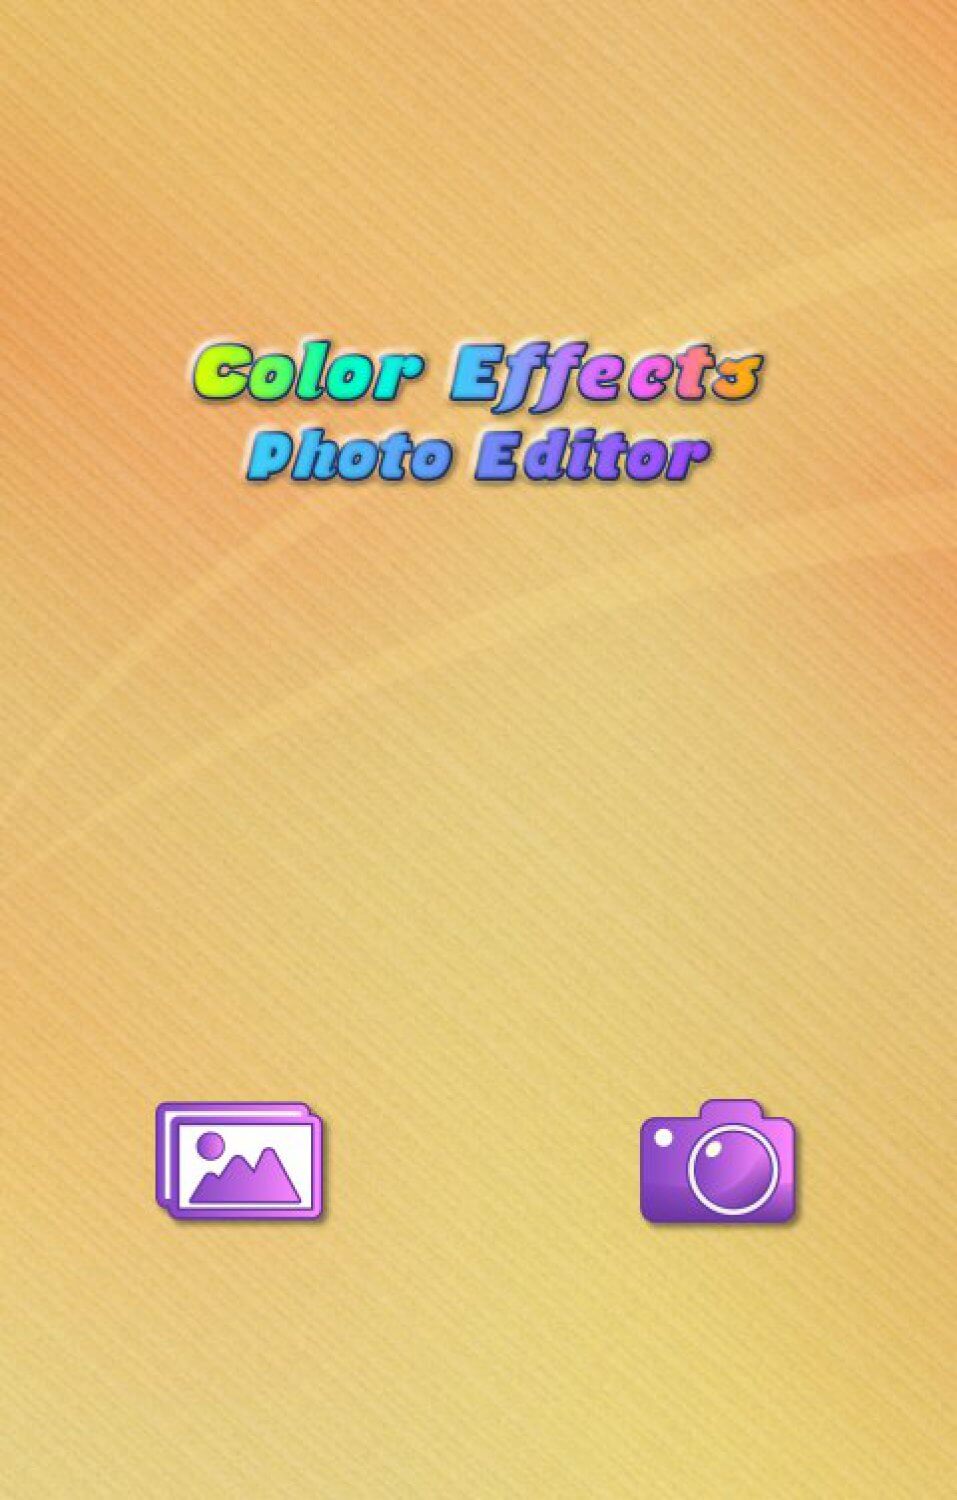 Color Effects Photo Editor